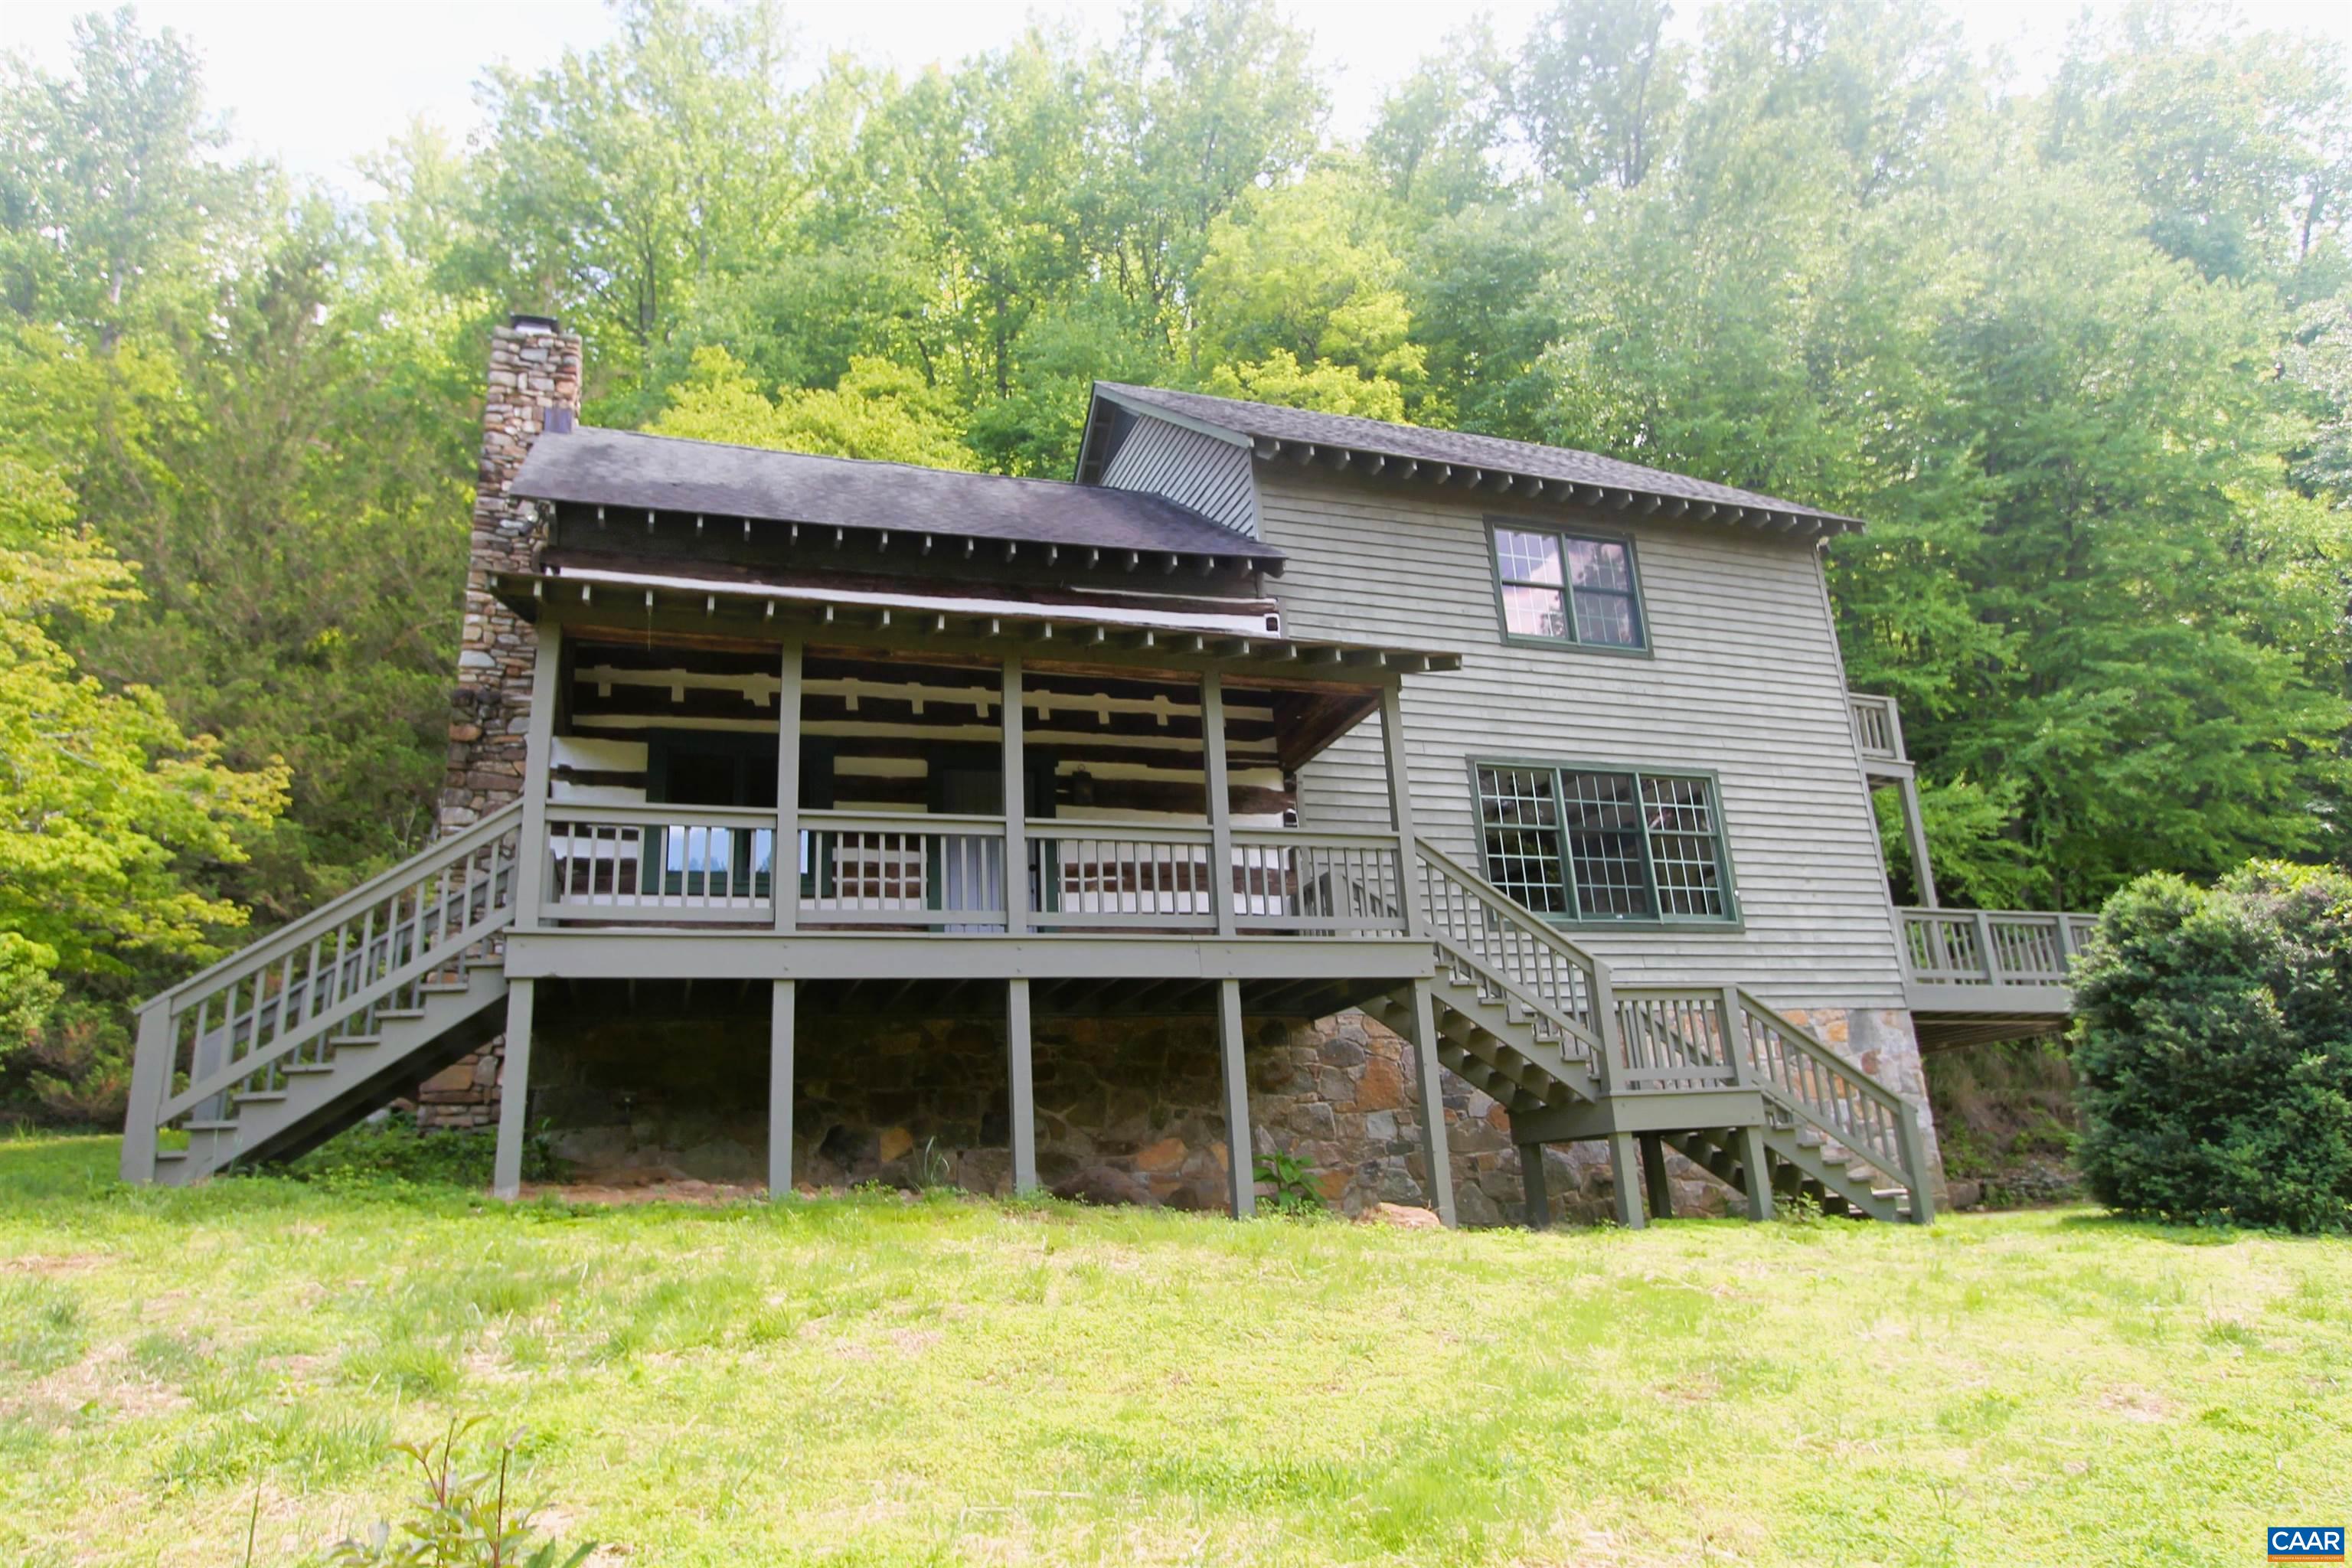 A Nelson County Gem!  This unique recently Updated and Freshly Painted 3 Bedroom 2 1/2 Bath Home is waiting for you. Sassafras Farm consists of 74.5 acres, a 200 year old chestnut log cabin was tastefully integrated into a two story farmhouse built in 1990.  Walk into the Living Room and see the beautiful Stone Hearth and add your own Wood Stove.  Bright New Kitchen with Exposed Beams include white granite Counters, SS Appliances and Range Hood, new cabinets and flooring.  Original cabin exposed walls and beams extend through out the House.  Laundry Room with new Tile Flooring.  Extensive stonework, multiple porches and decks, dramatic views.  2-Stall Horse Barn.